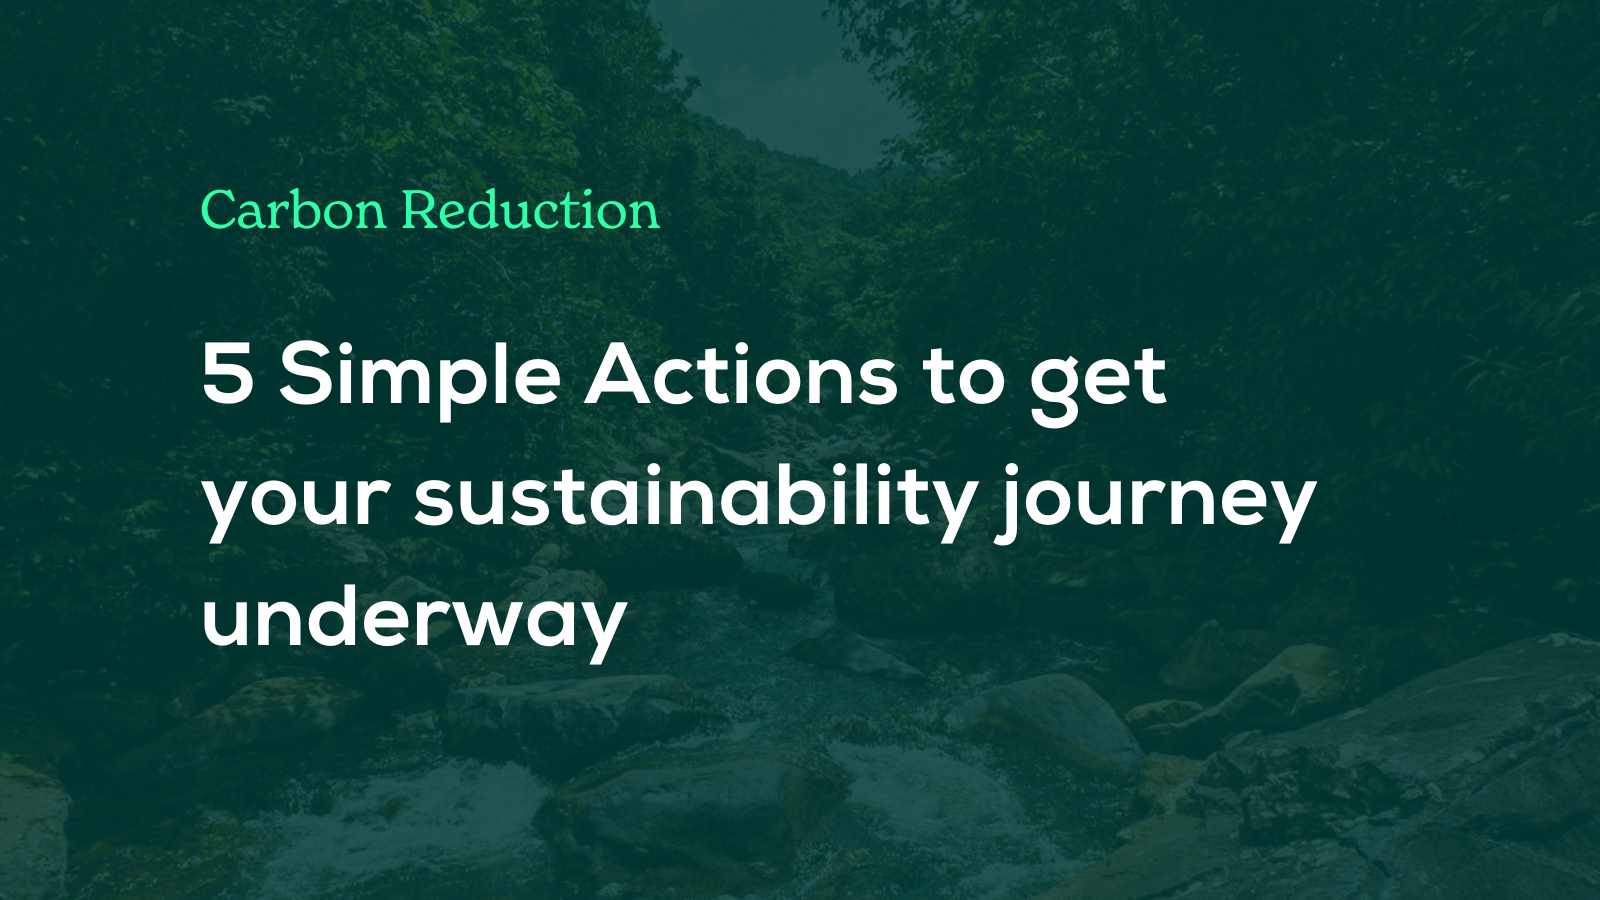 Carbon Reduction: 5 Simple Actions You Can Take This Week